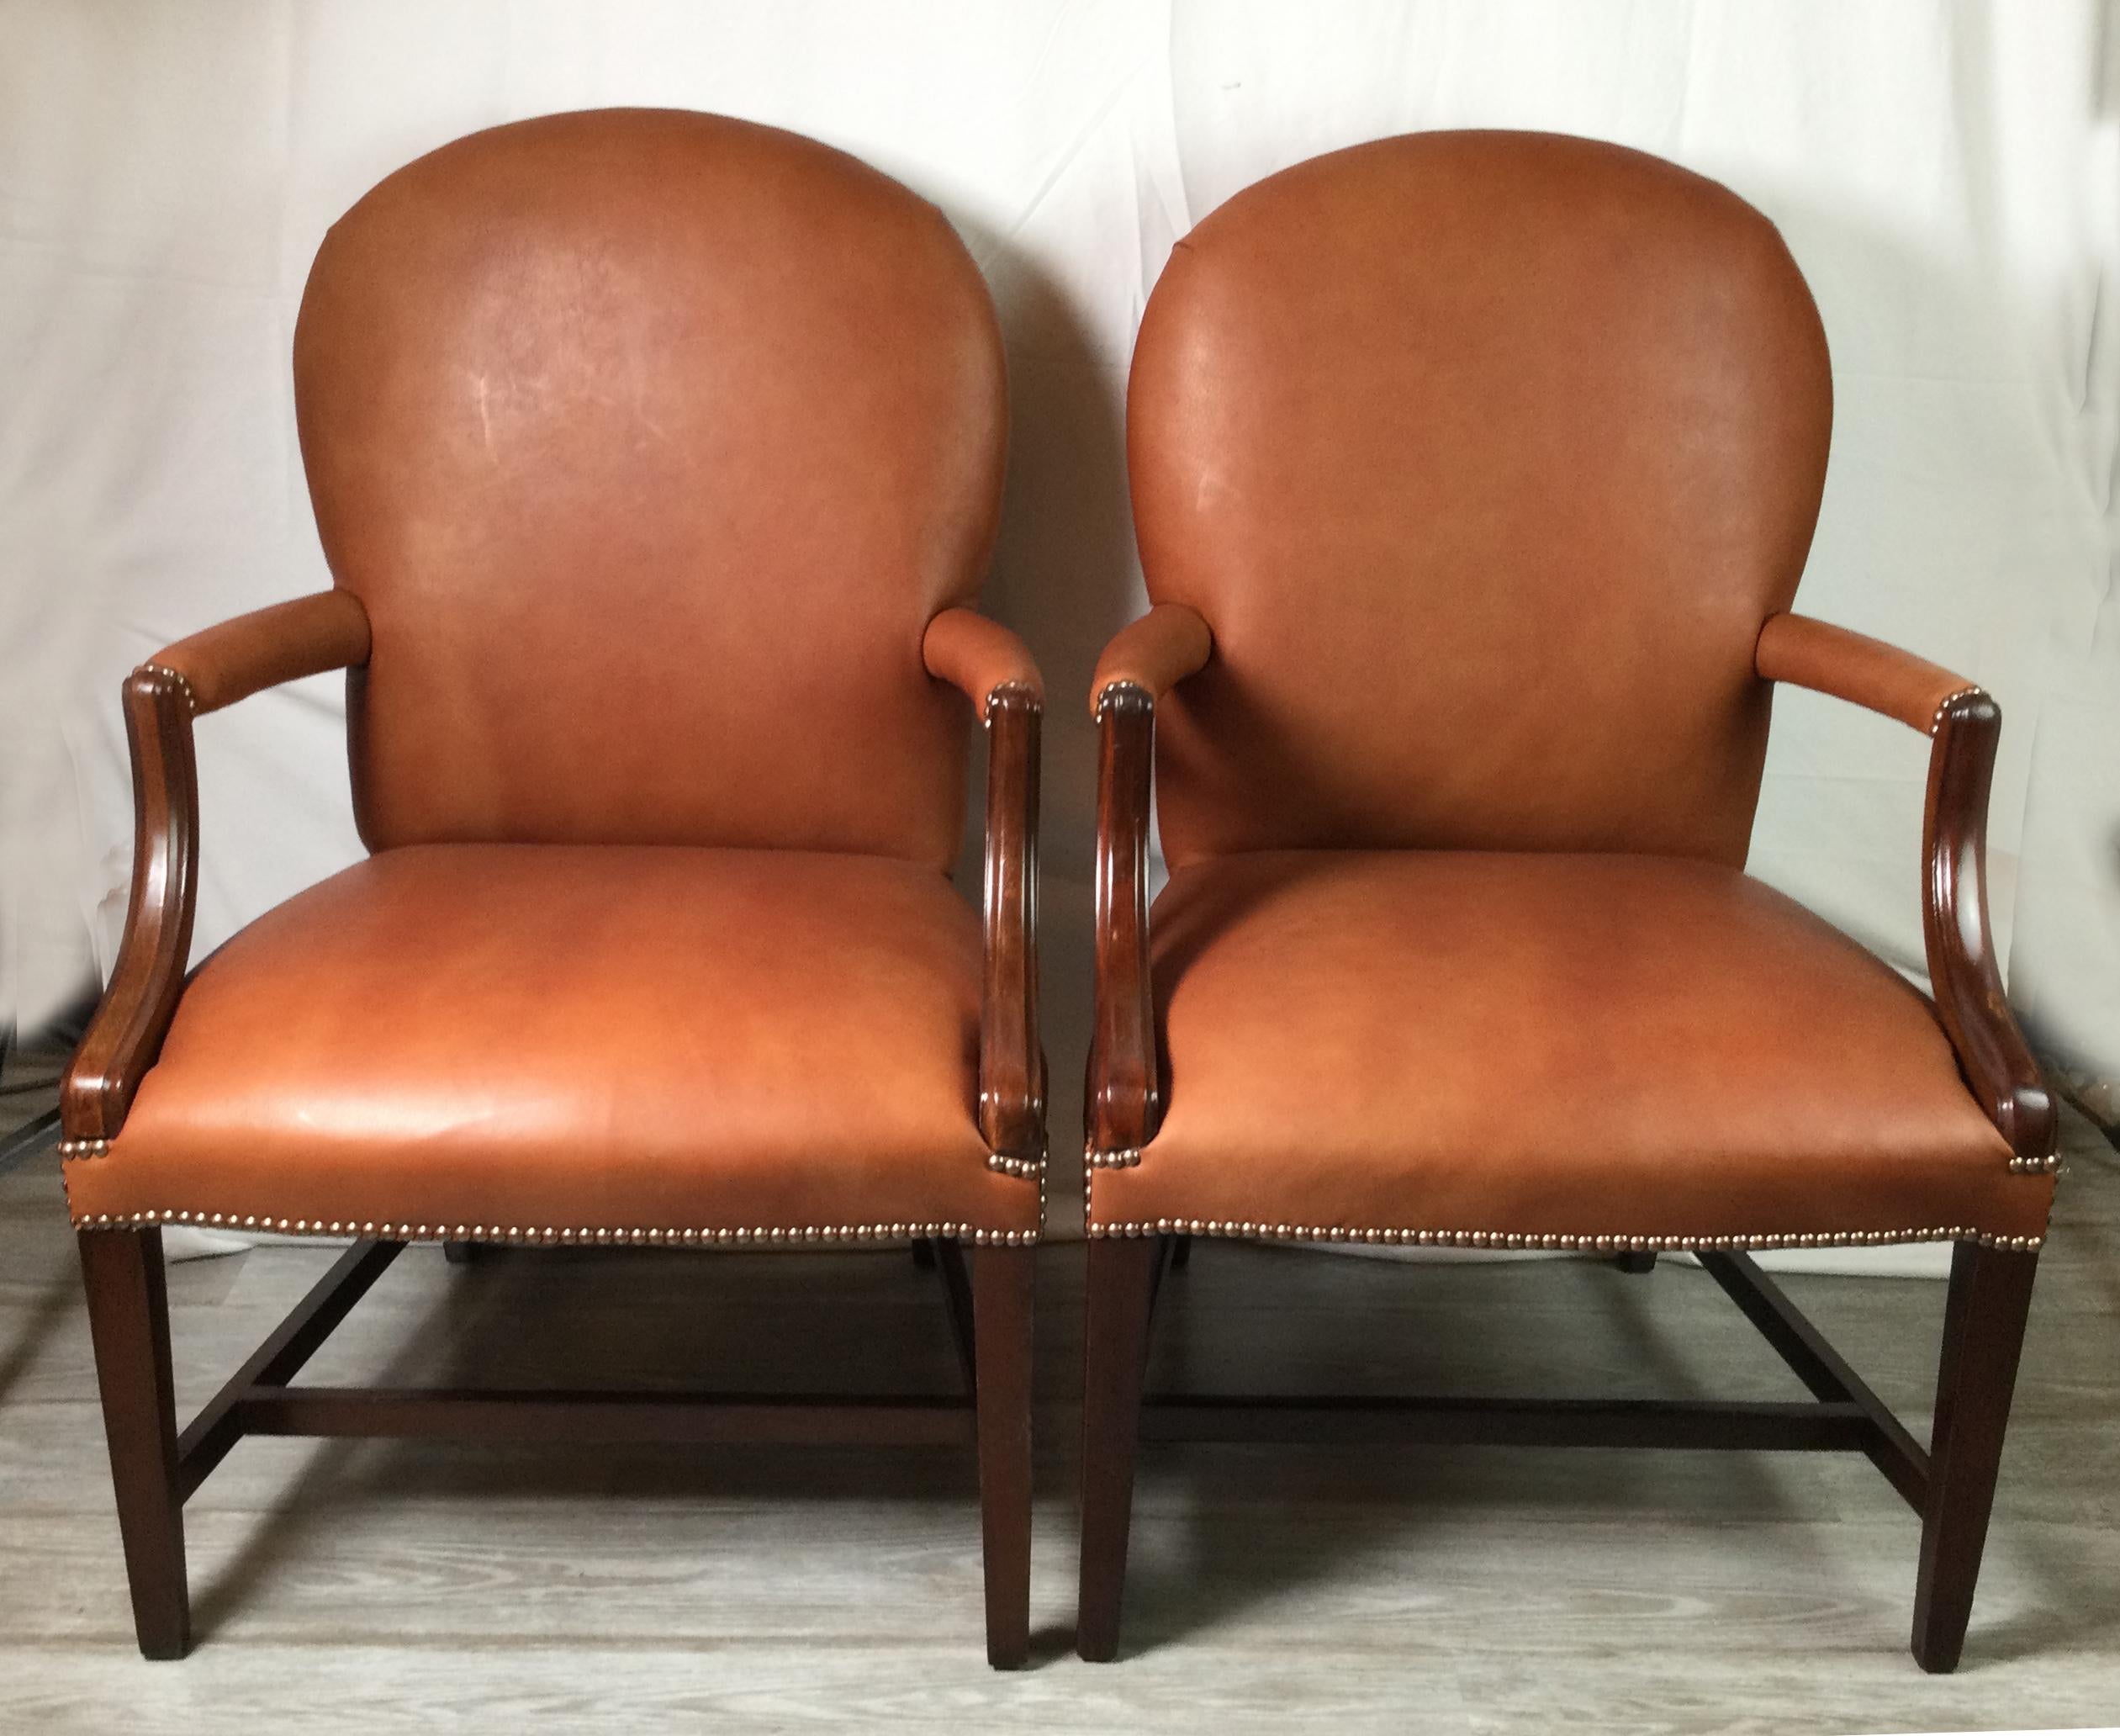 A pair of mahogany and leather open armchairs with new leather upholstery. The rounded backs with leather covered arms with attached leather seats.